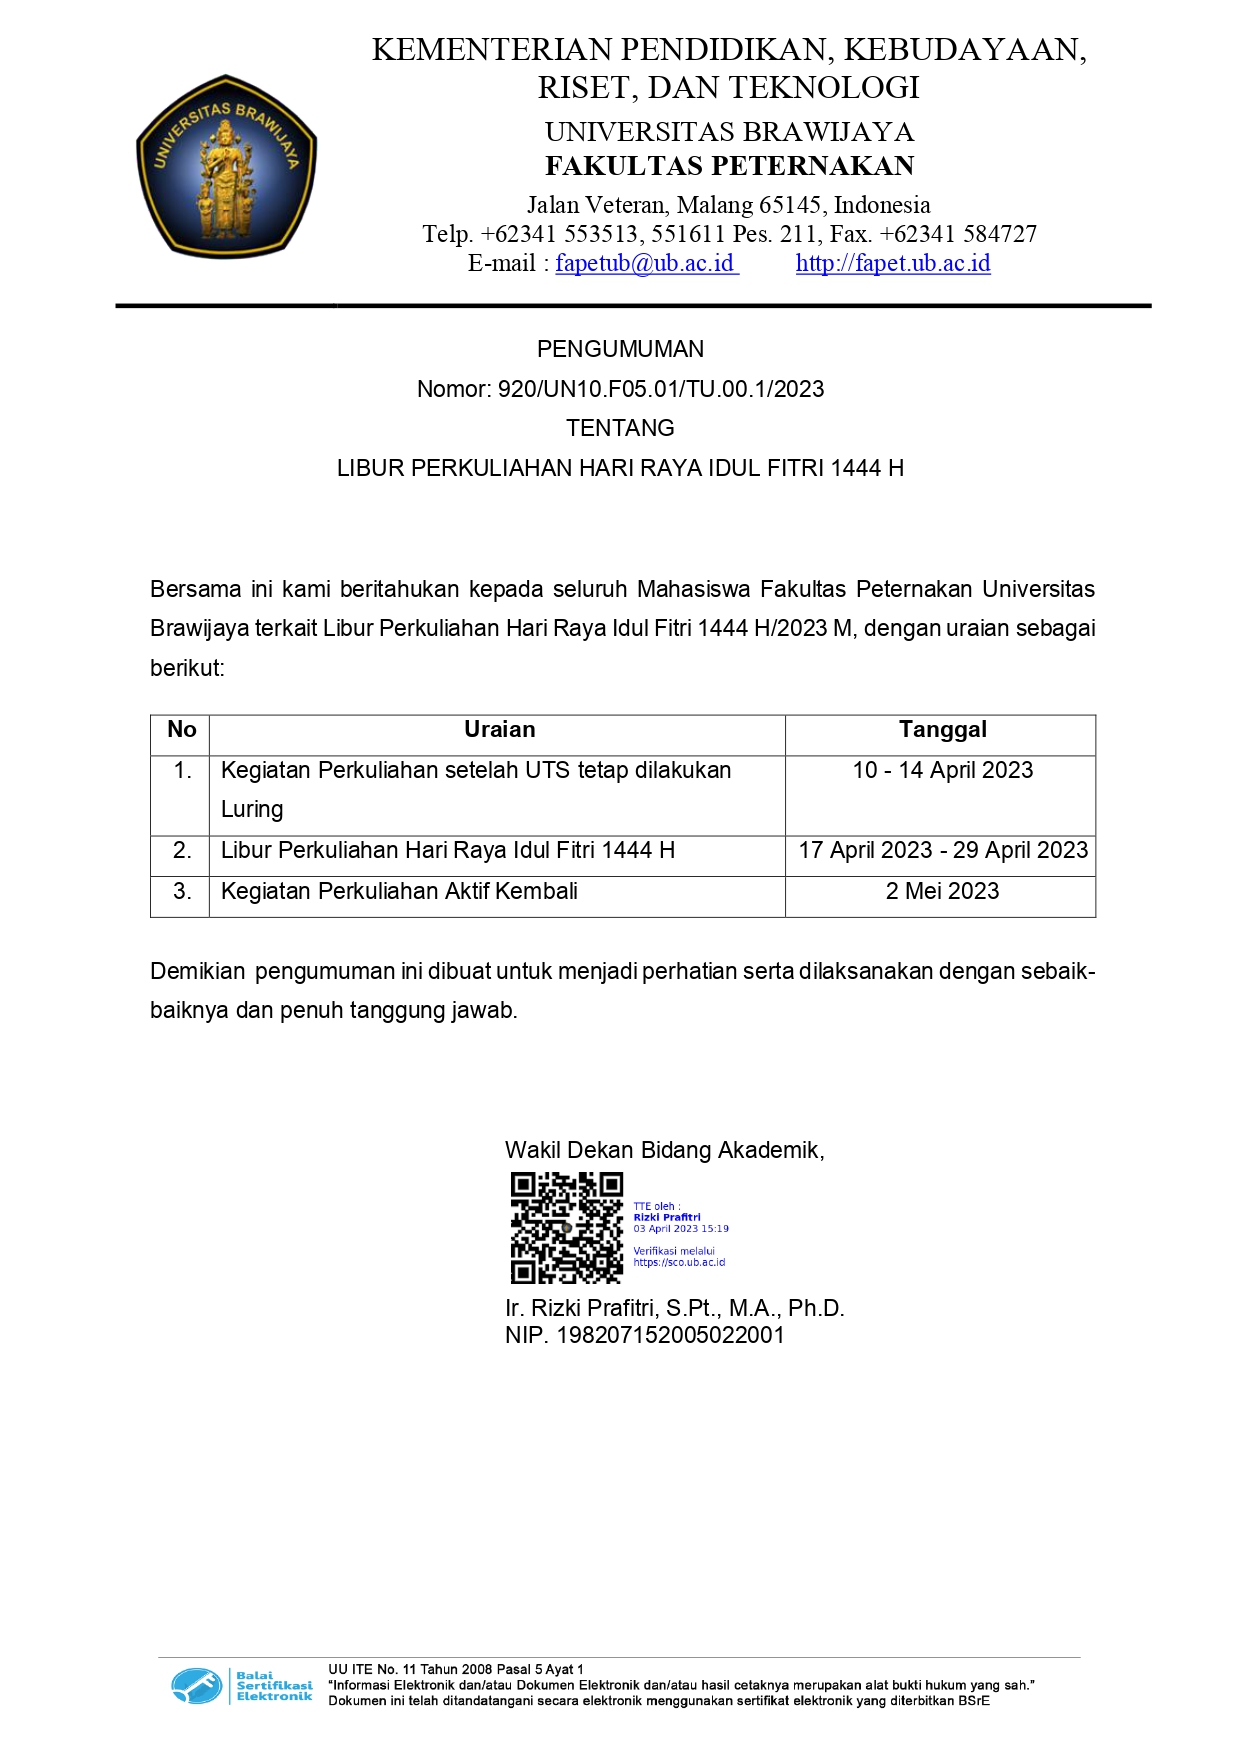 Announcement of Lecture Holidays Ahead of Eid Al-Fitr 1444H